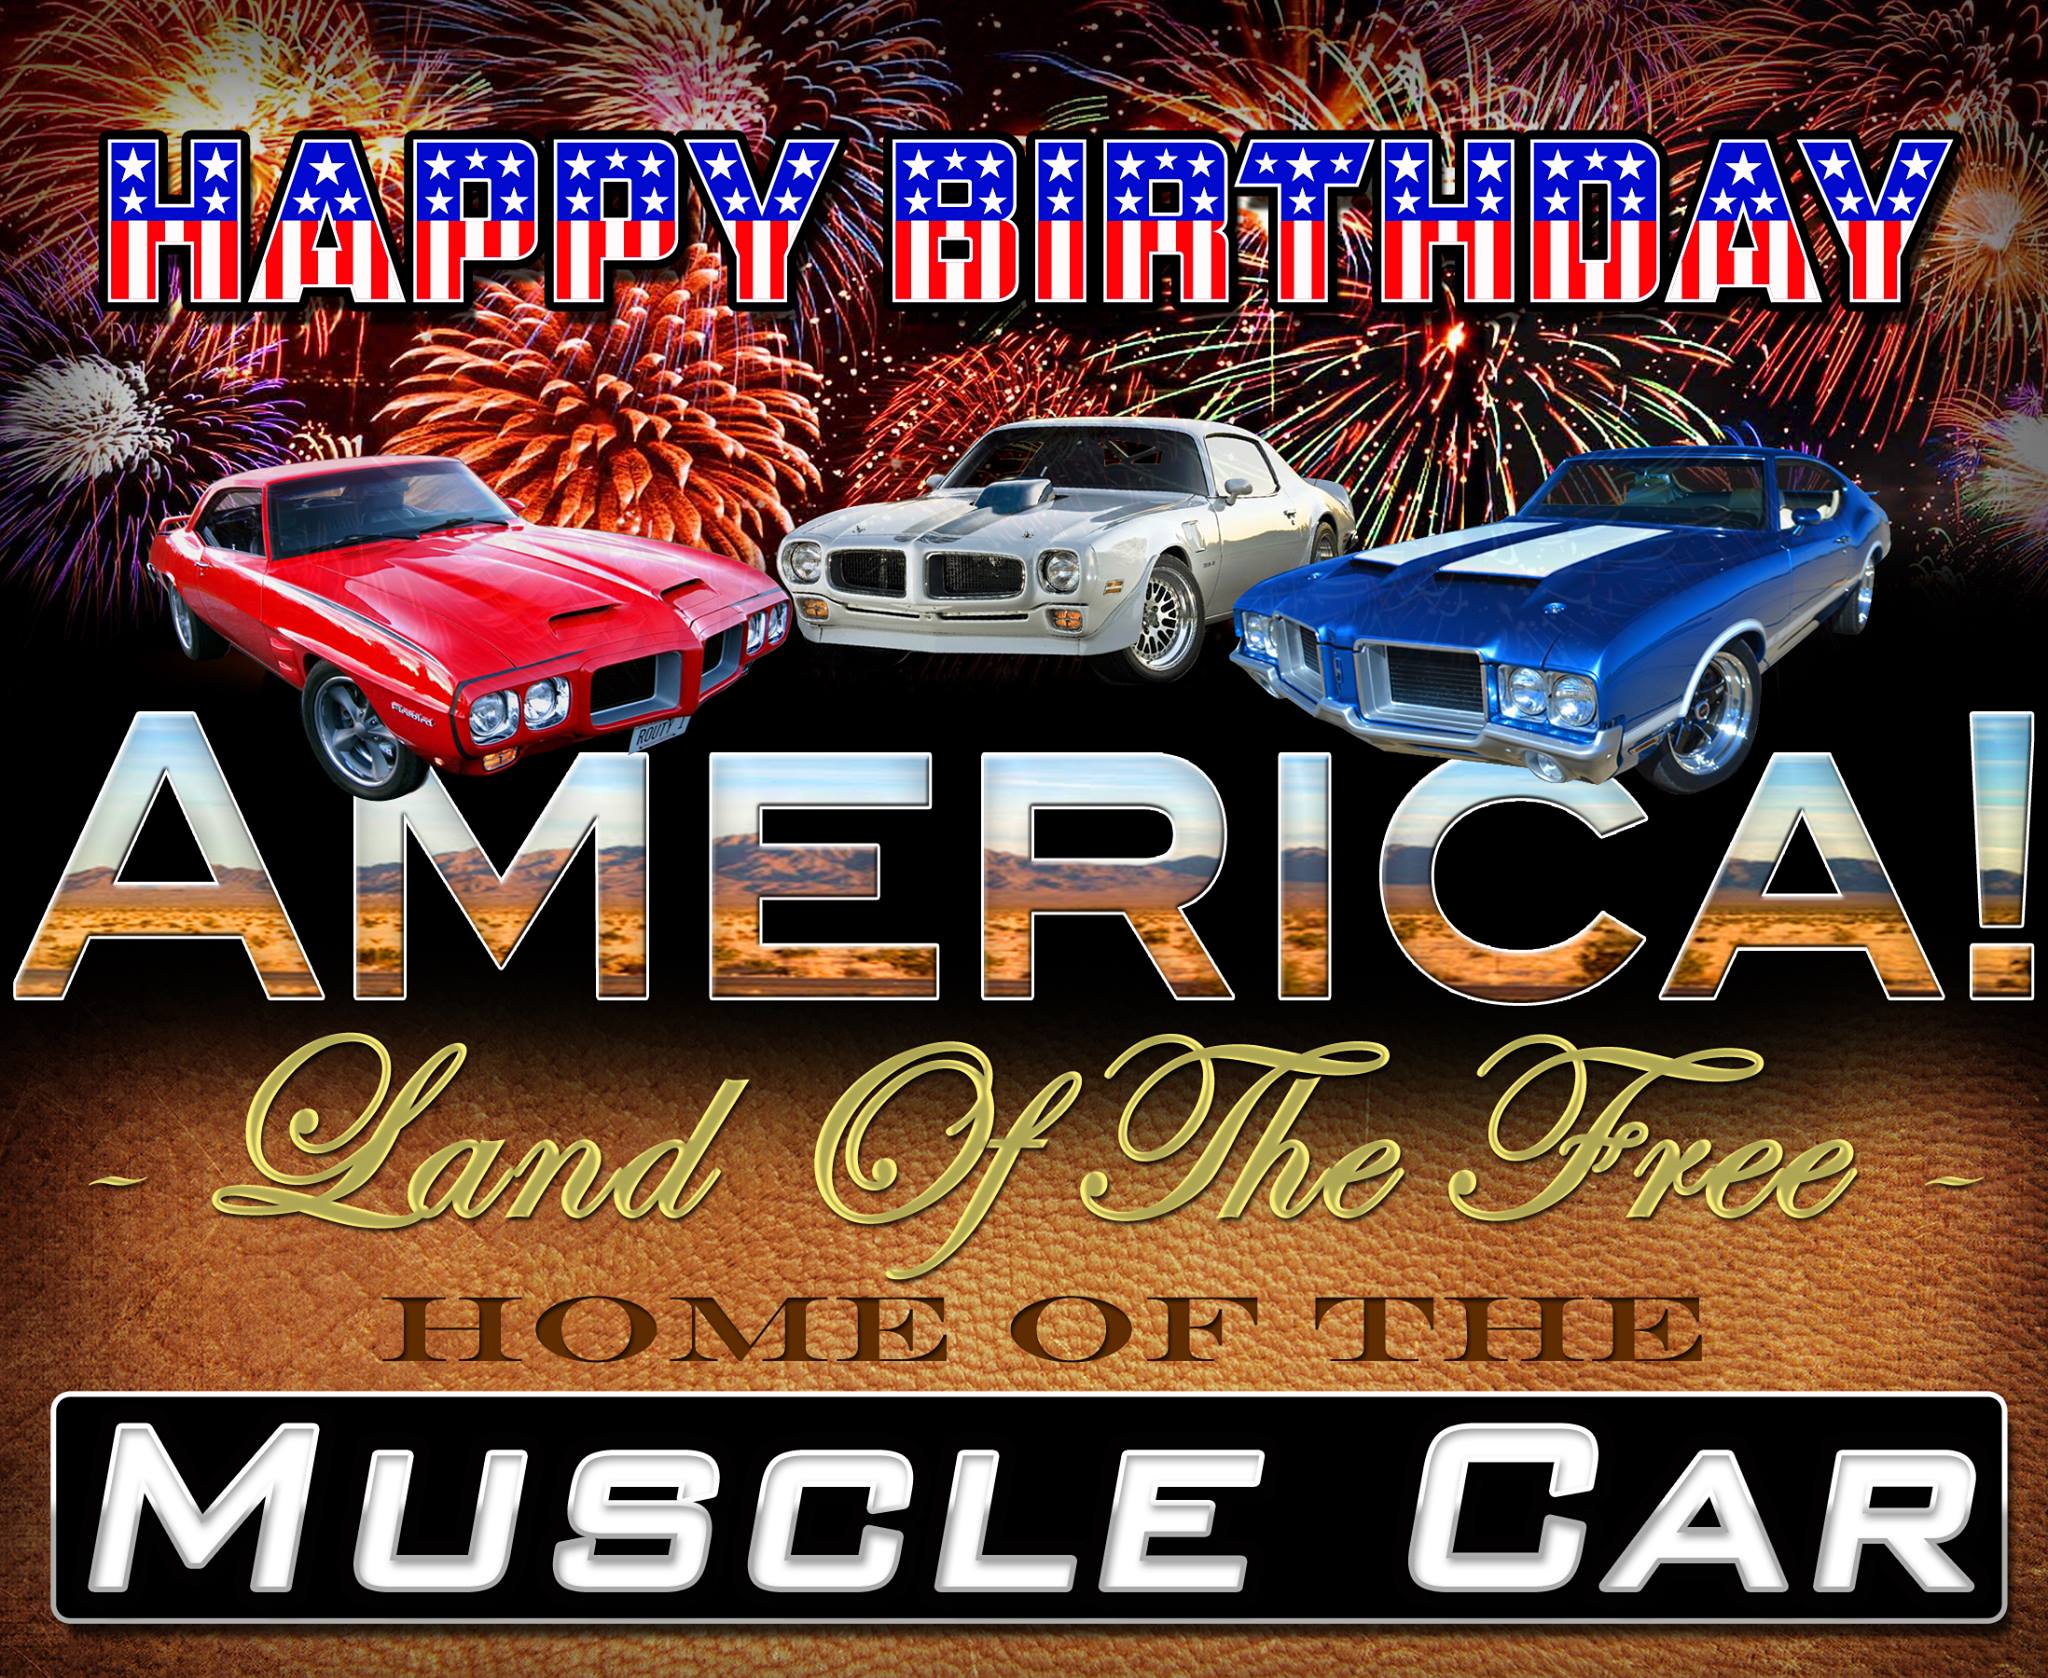 Happy 4th Of July from V8 Speed and Resto Shop